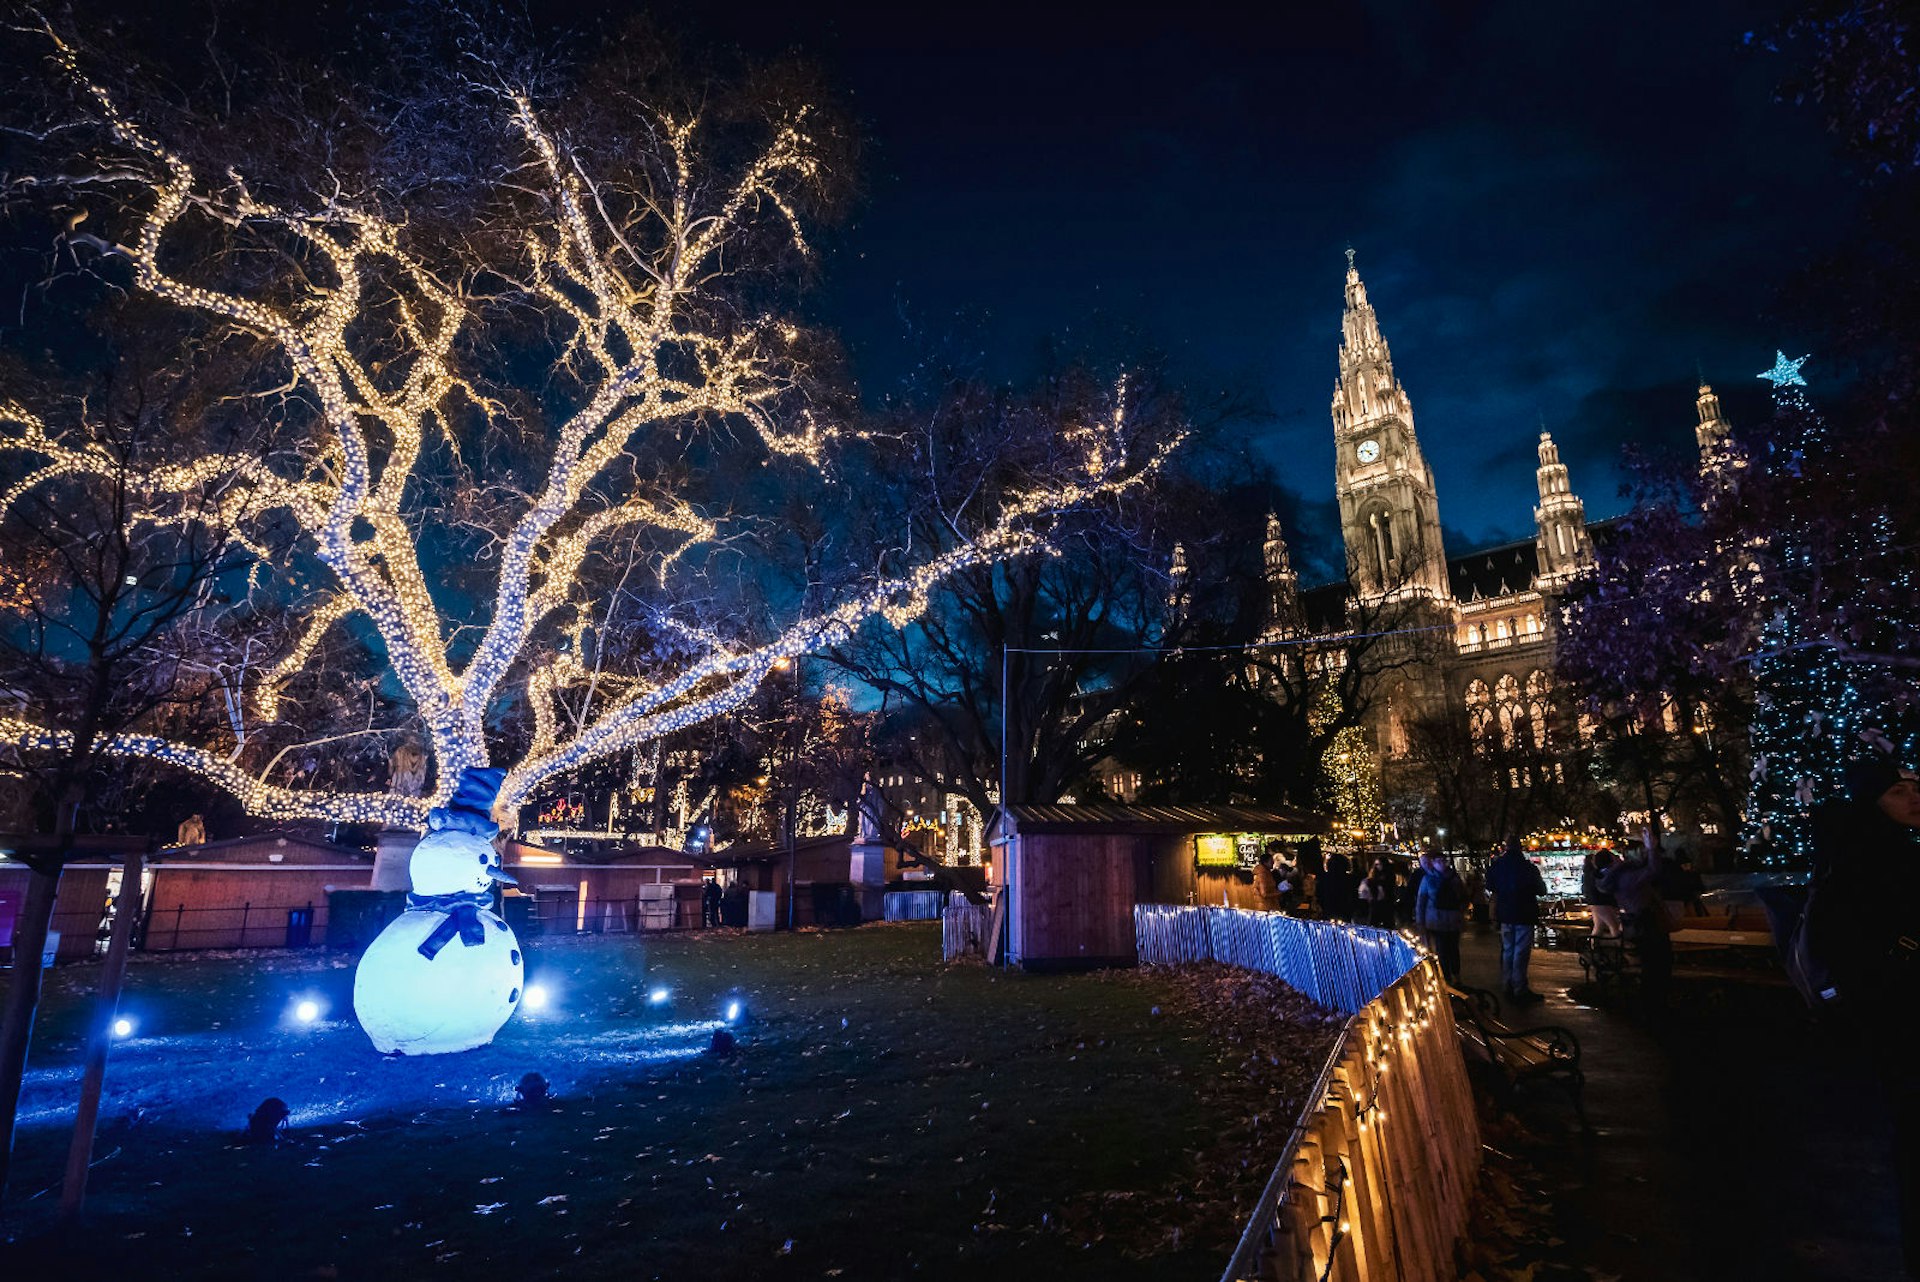 Night shot of Christmas markets at Rathausplatz with a lighted ornate tree and town hall in the background